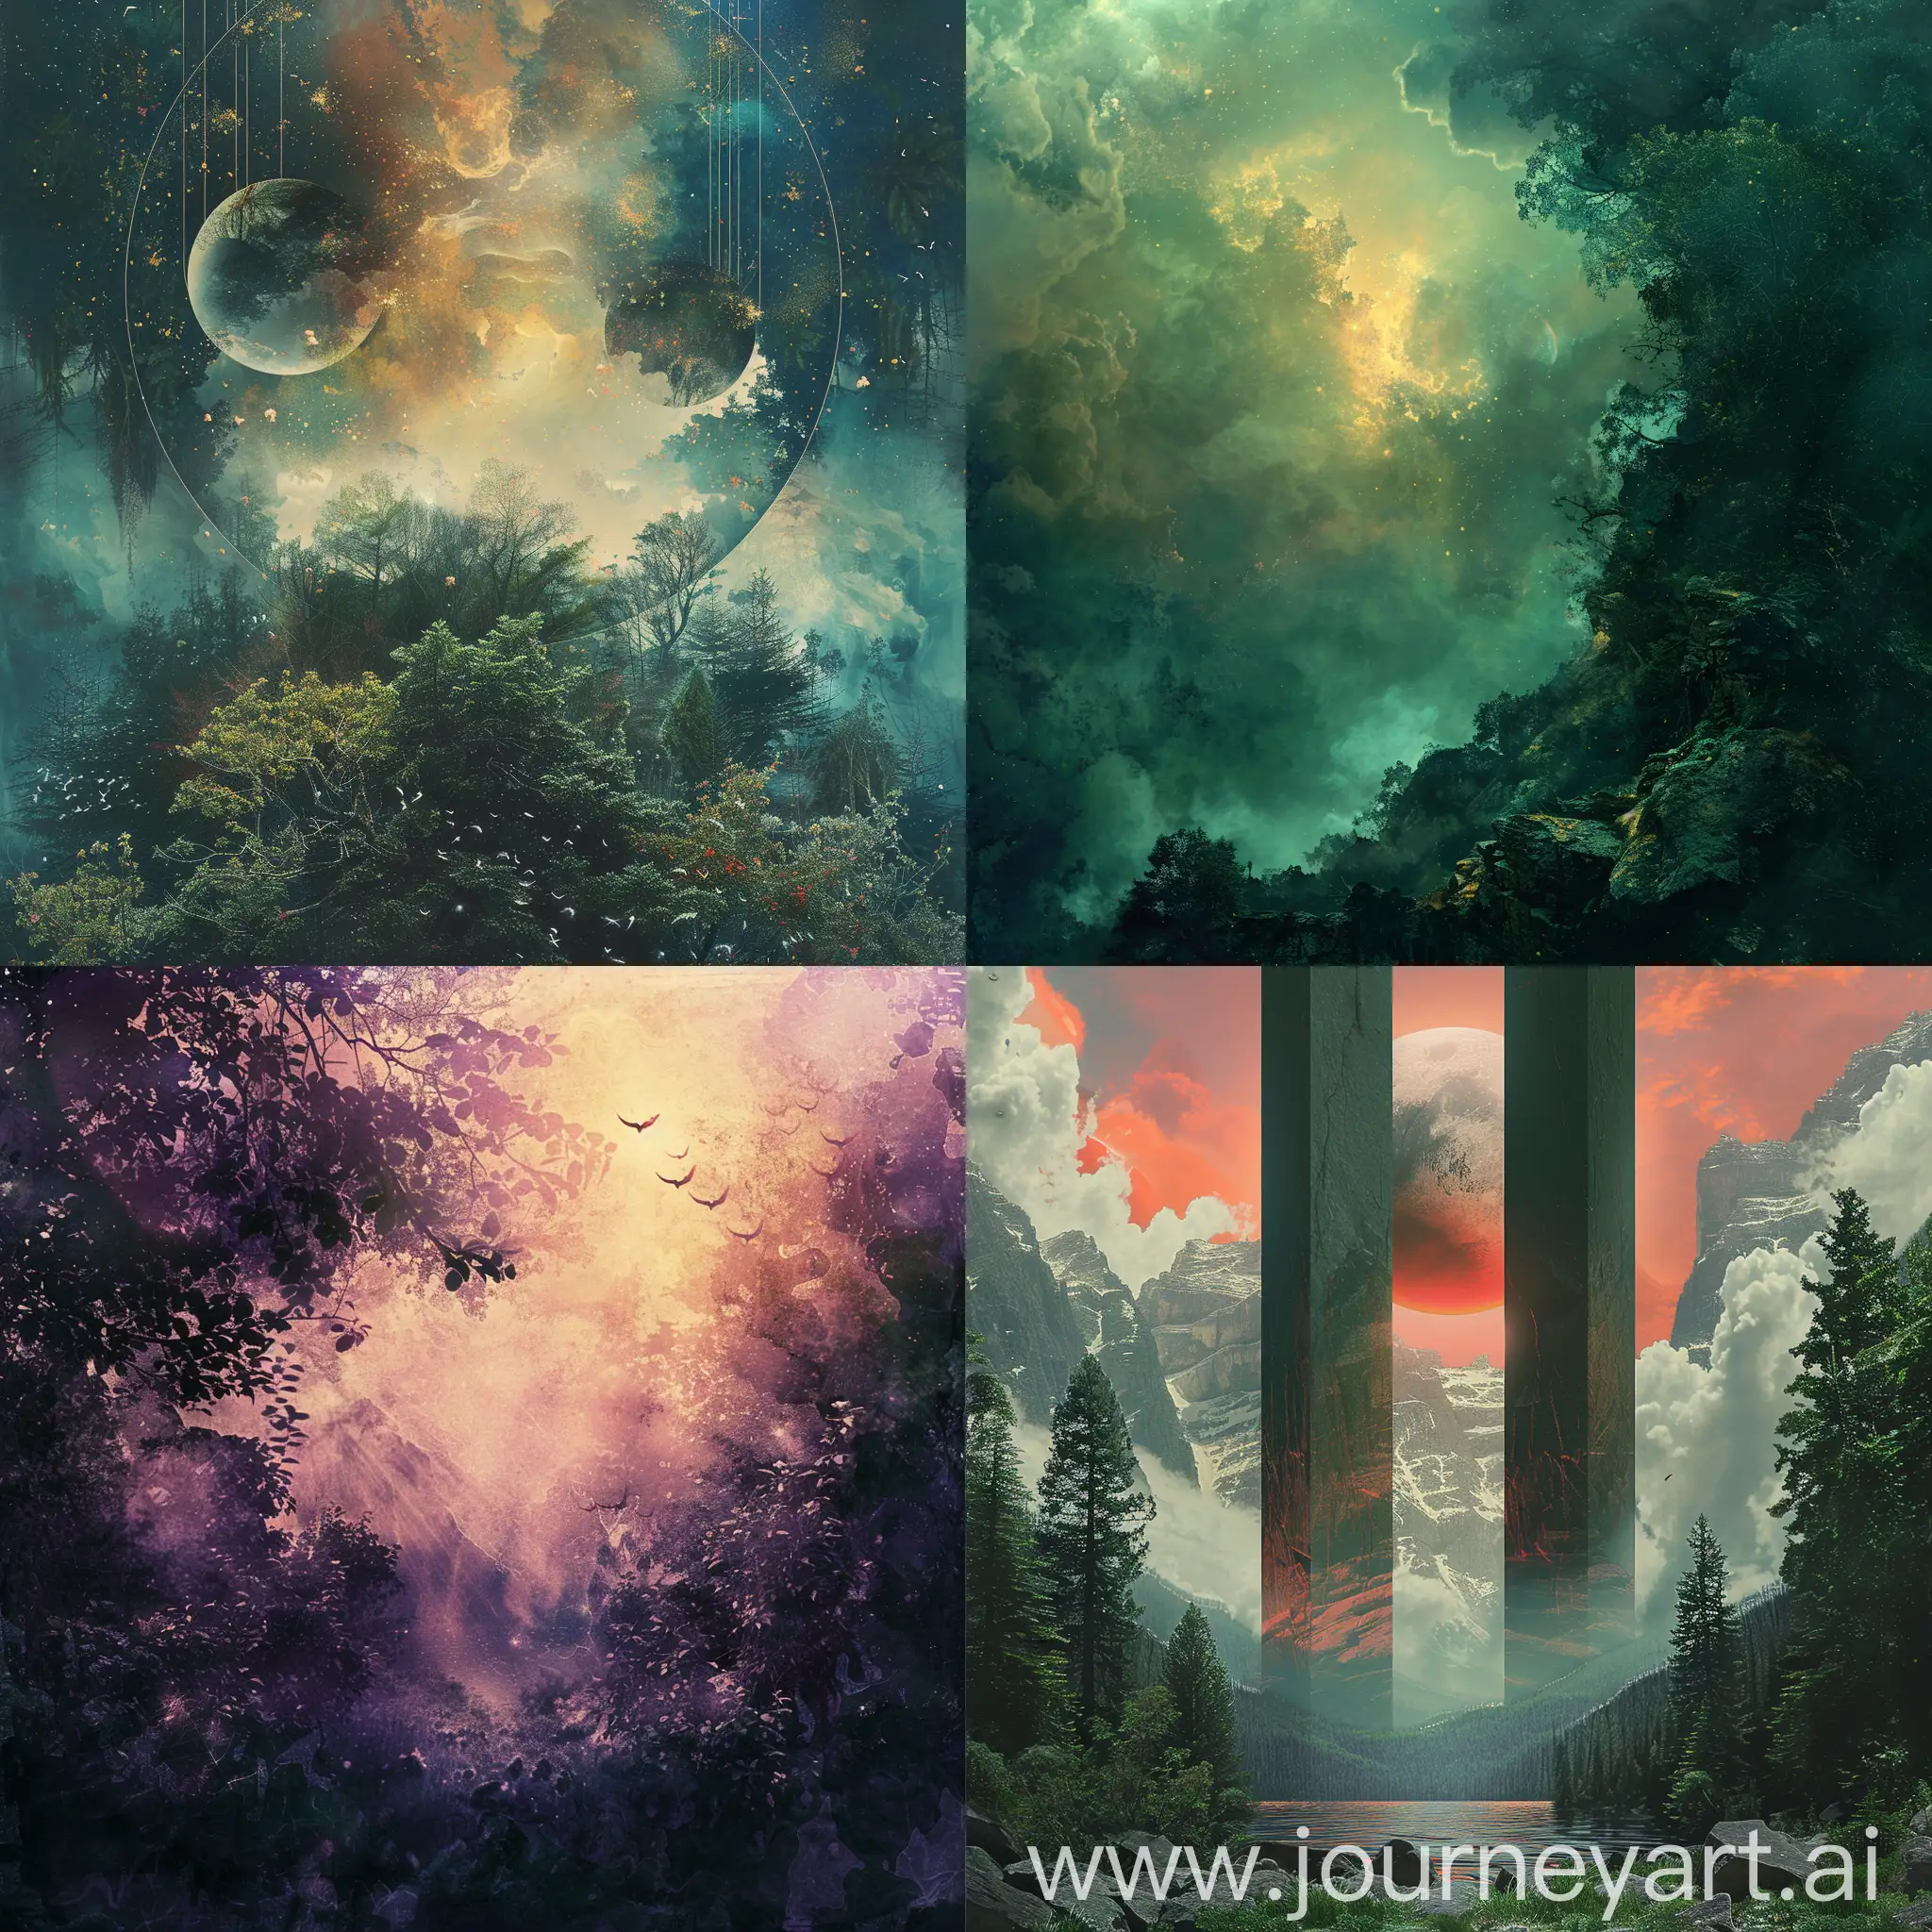 ethereal otherwordly cinematic album cover art with a touch of nature and an ascending mood